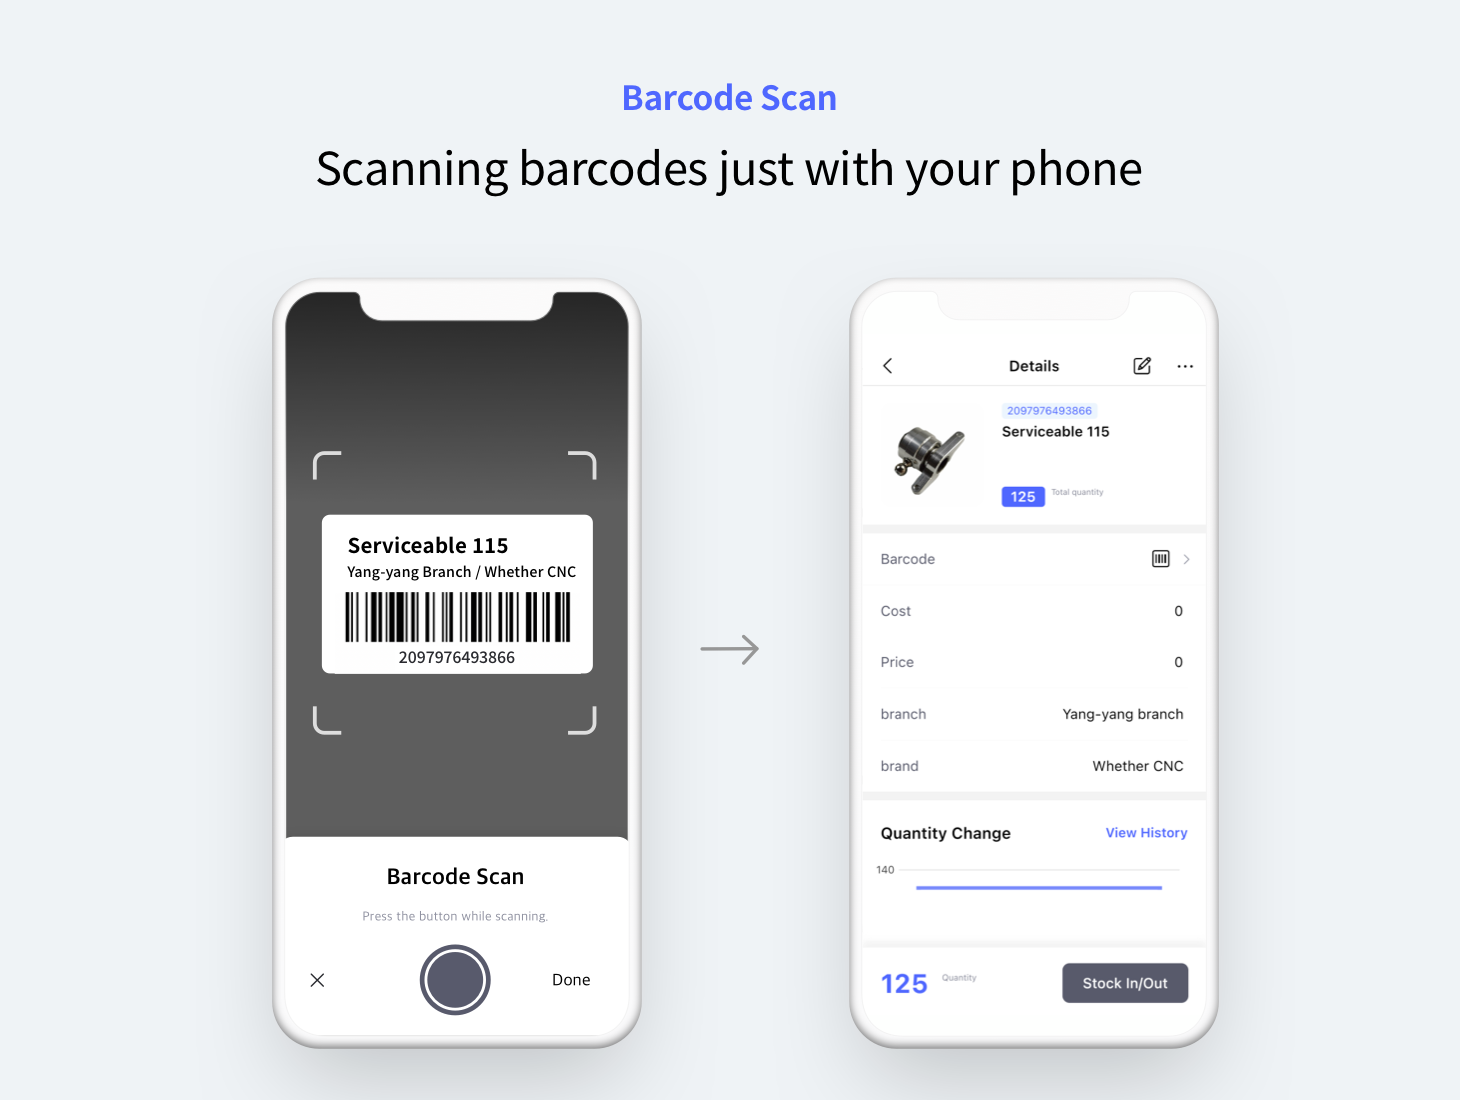 Barcode Scan: Scan barcodes just with your phone (or with traditional scanner of course!)